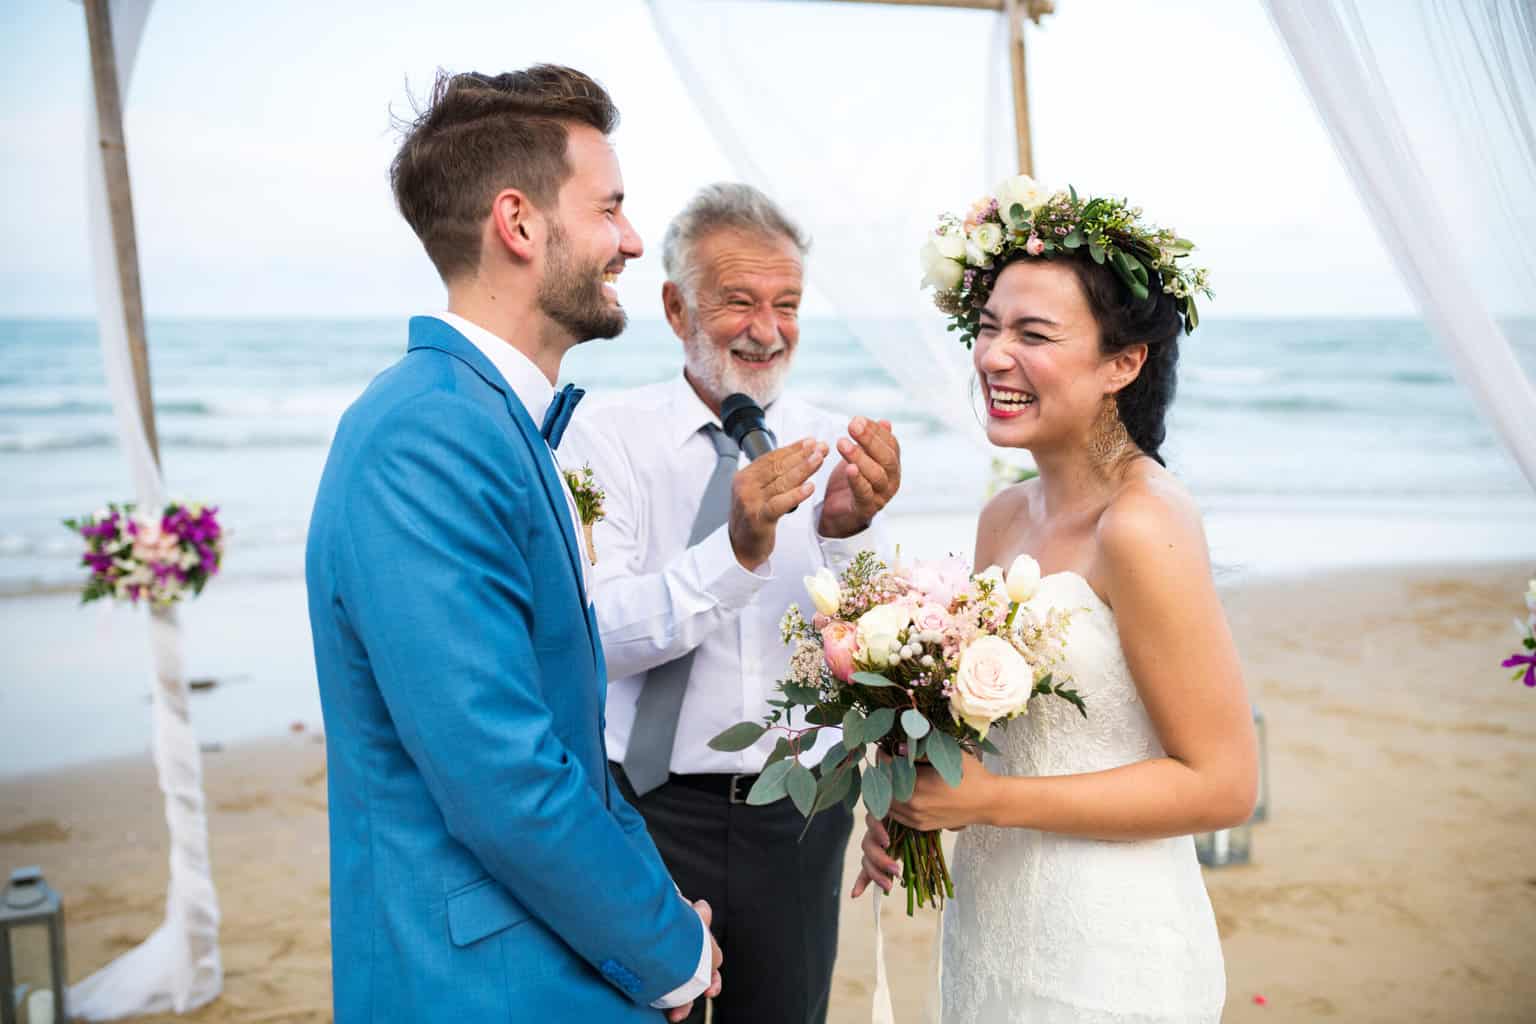 Couple having a laugh at their wedding